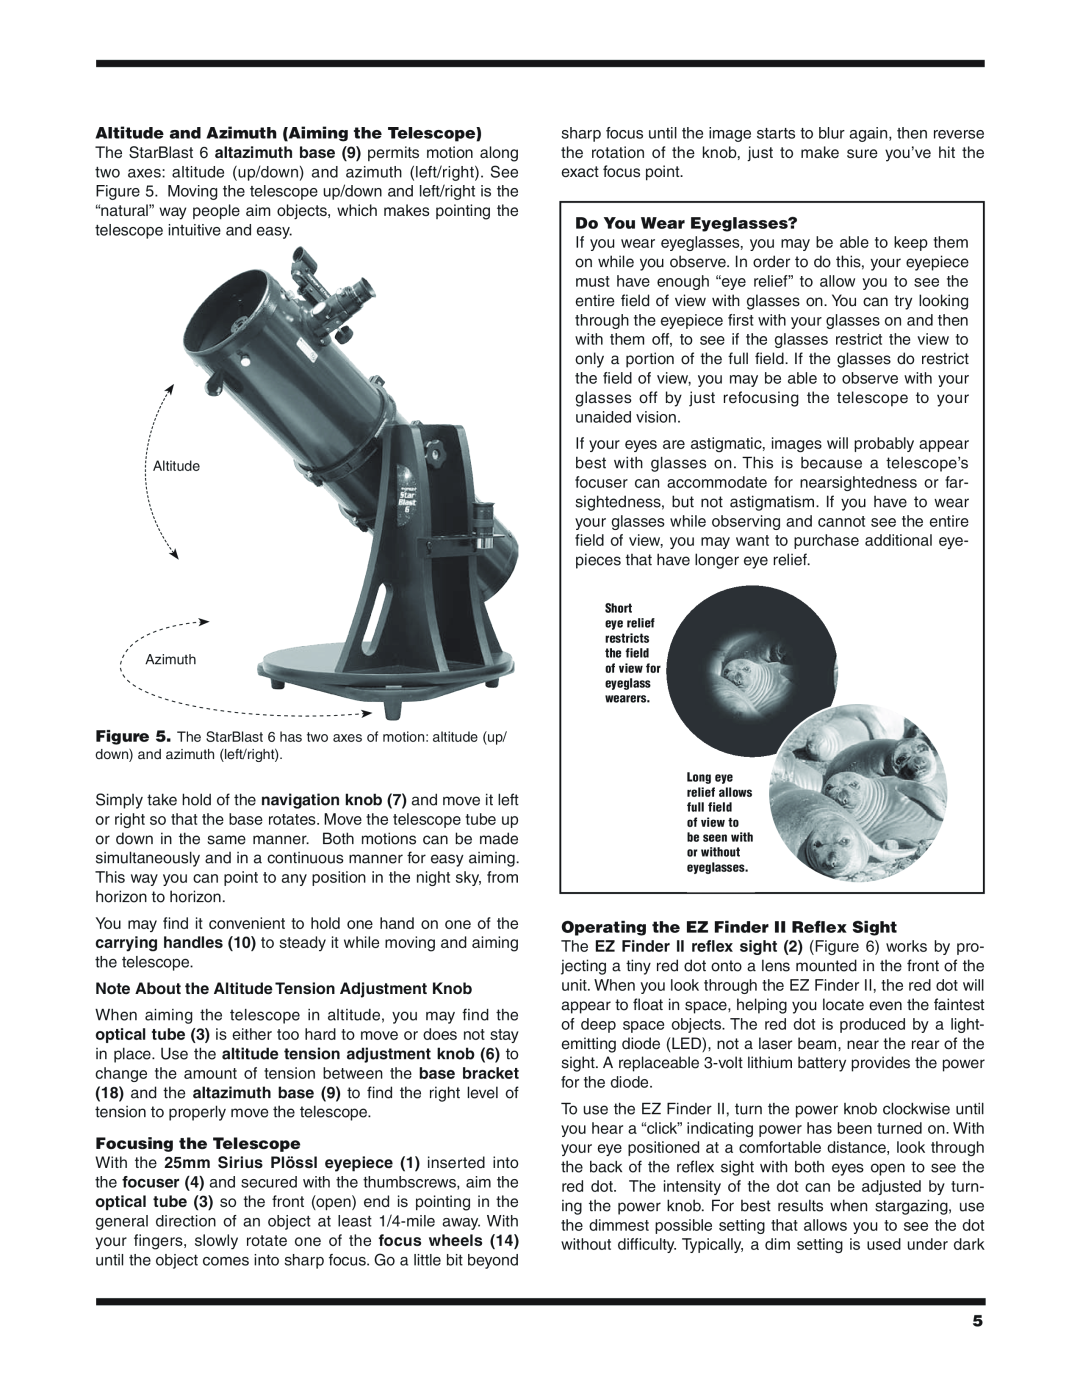 Orion 9964 instruction manual Altitude and Azimuth Aiming the Telescope, Note About the Altitude Tension Adjustment Knob 